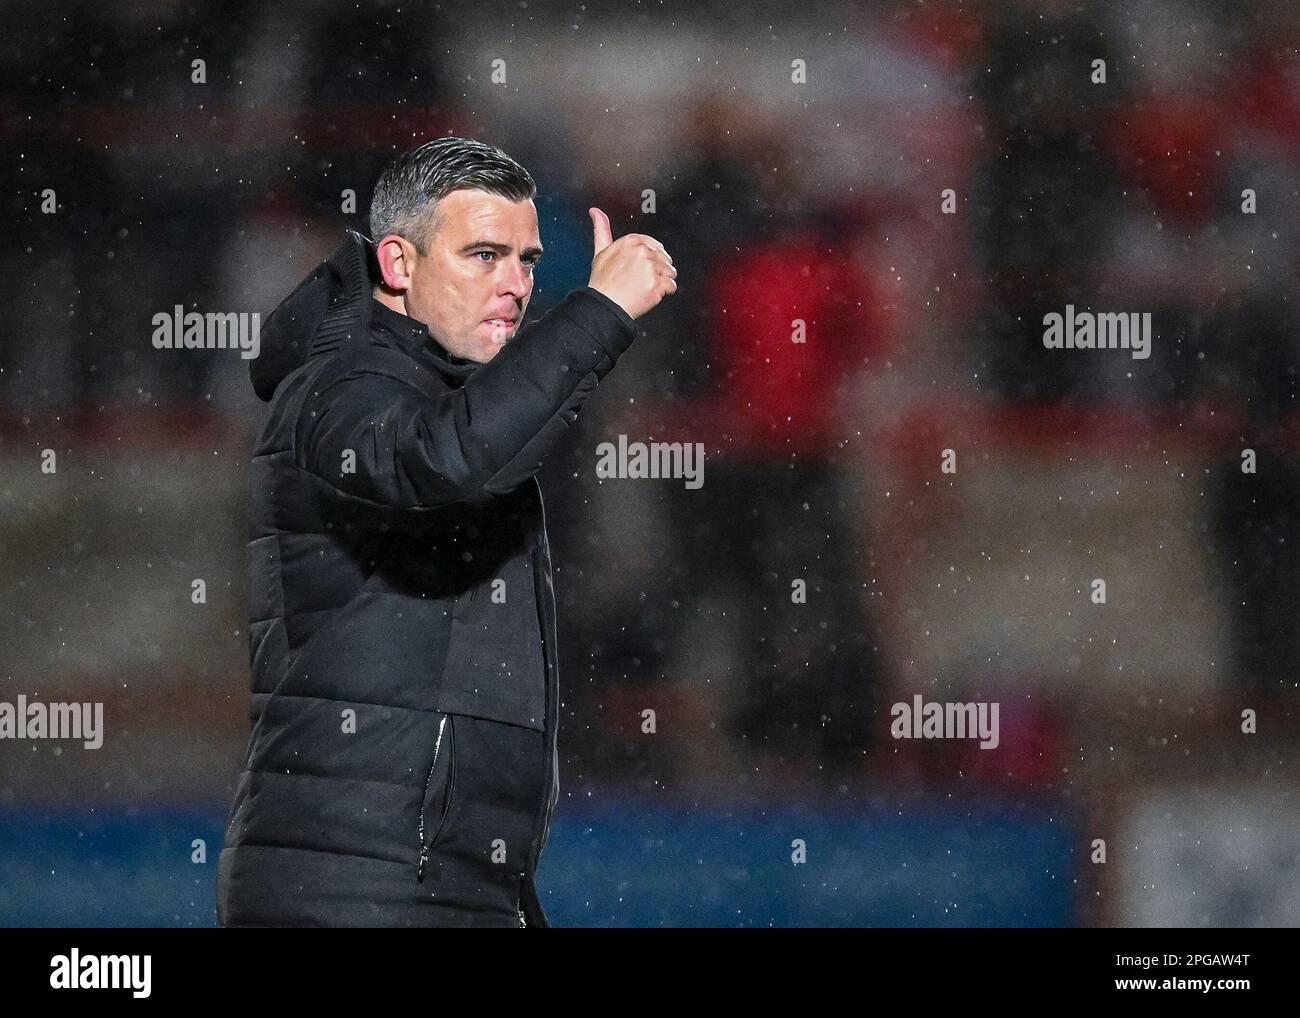 Plymouth Argyle Manager Steven Schumacher  celebrates a win at full time and applauds the fans at full time with thumb up during the Sky Bet League 1 match Accrington Stanley vs Plymouth Argyle at Wham Stadium, Accrington, United Kingdom, 21st March 2023  (Photo by Stan Kasala/News Images) Stock Photo